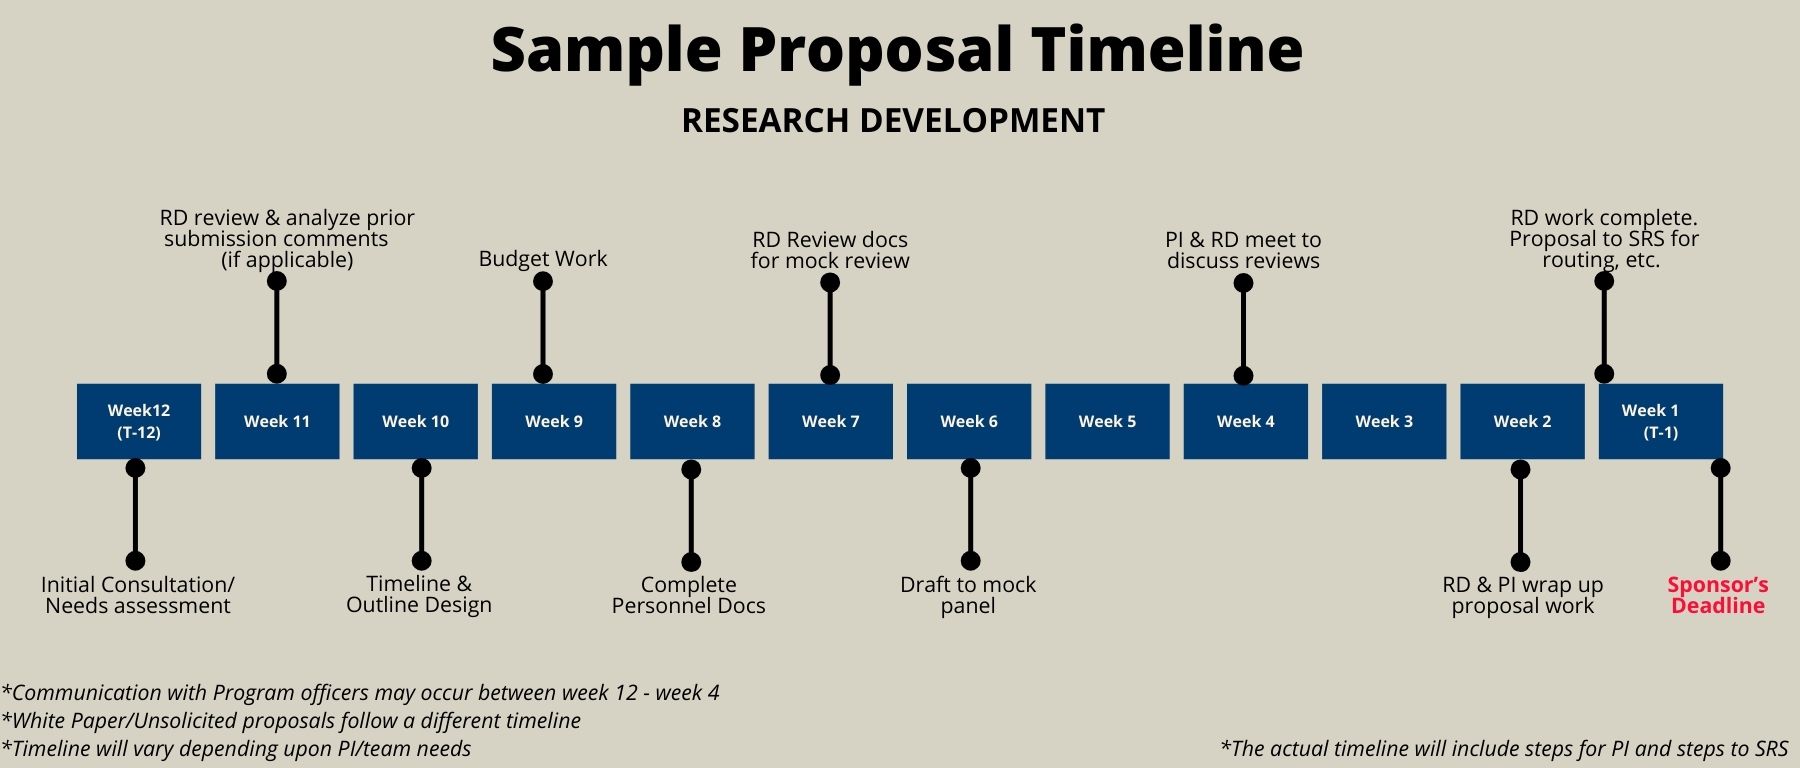 image shwing a timeline of steps taken for reasearch development. 